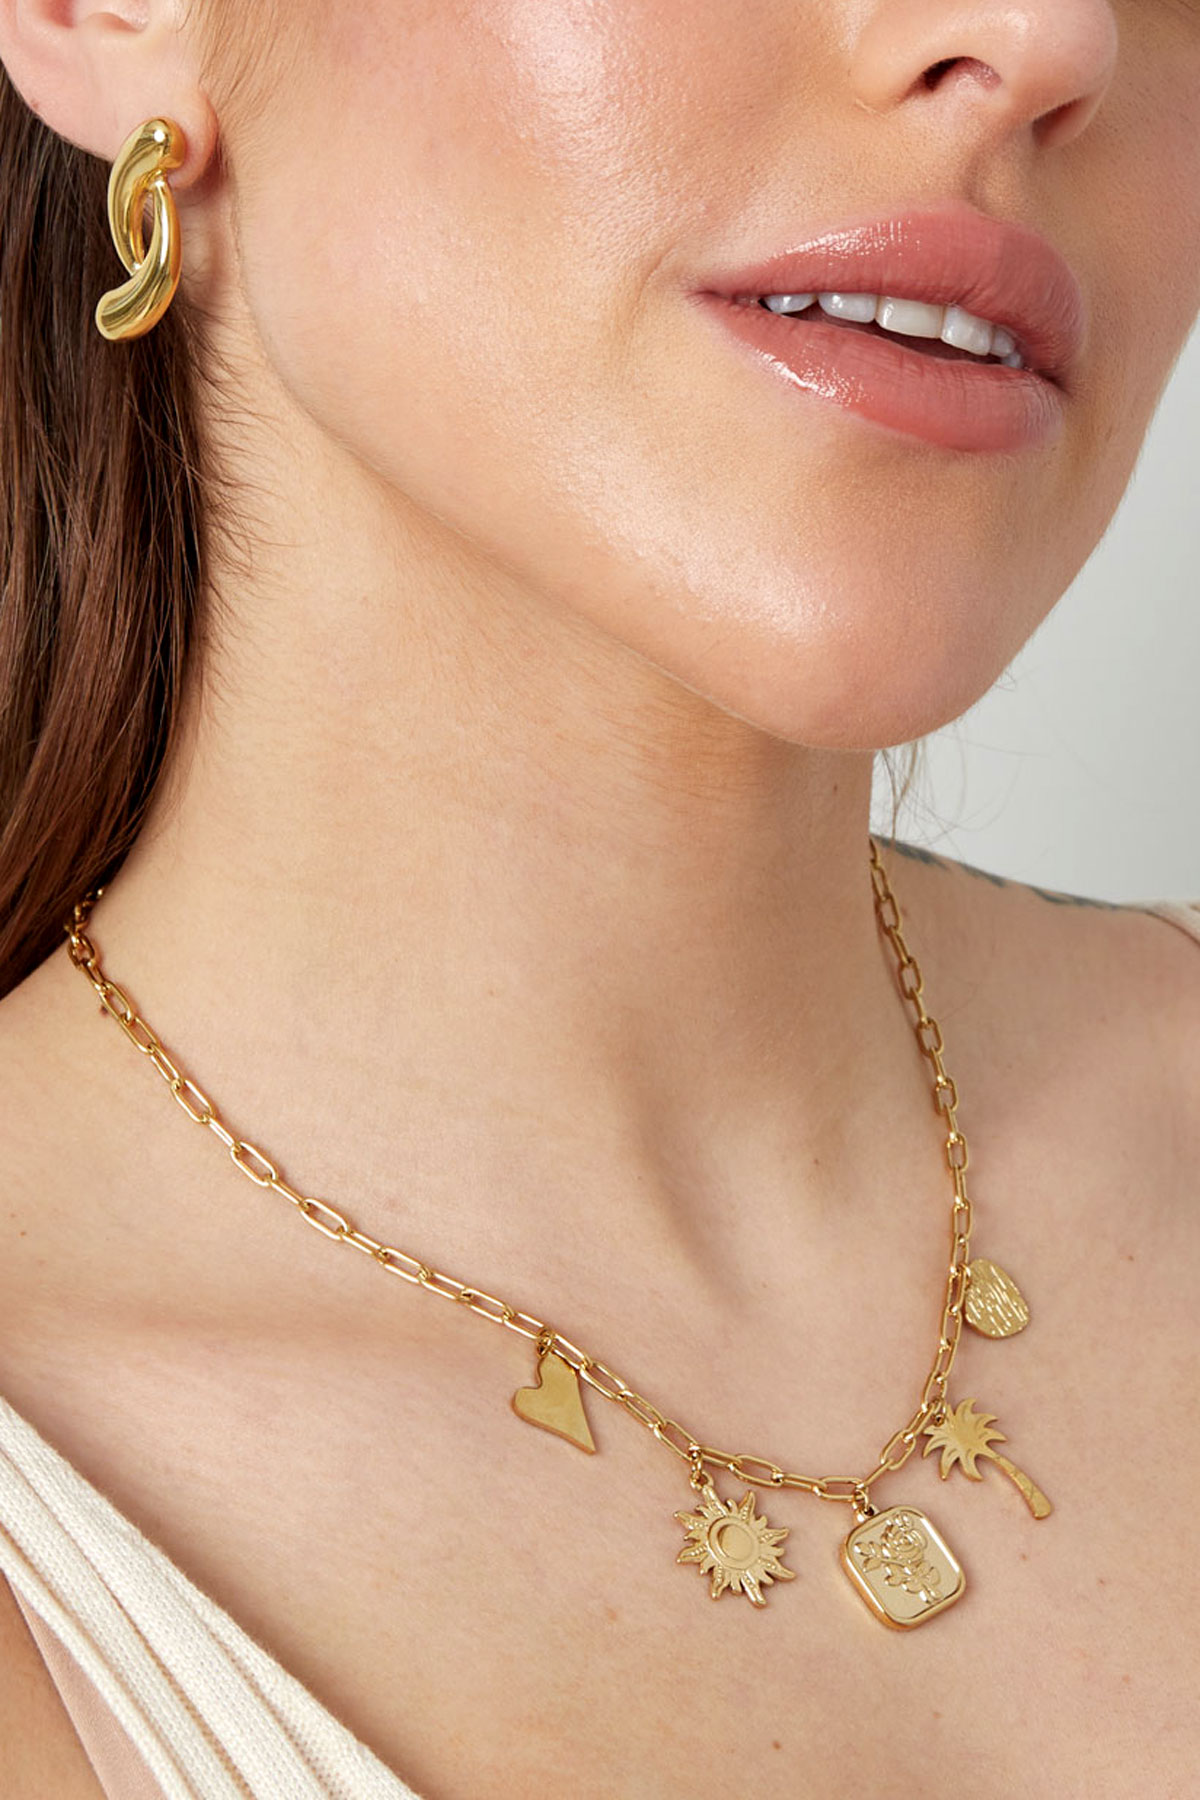 Bedelketting palm possesion - goud h5 Afbeelding3